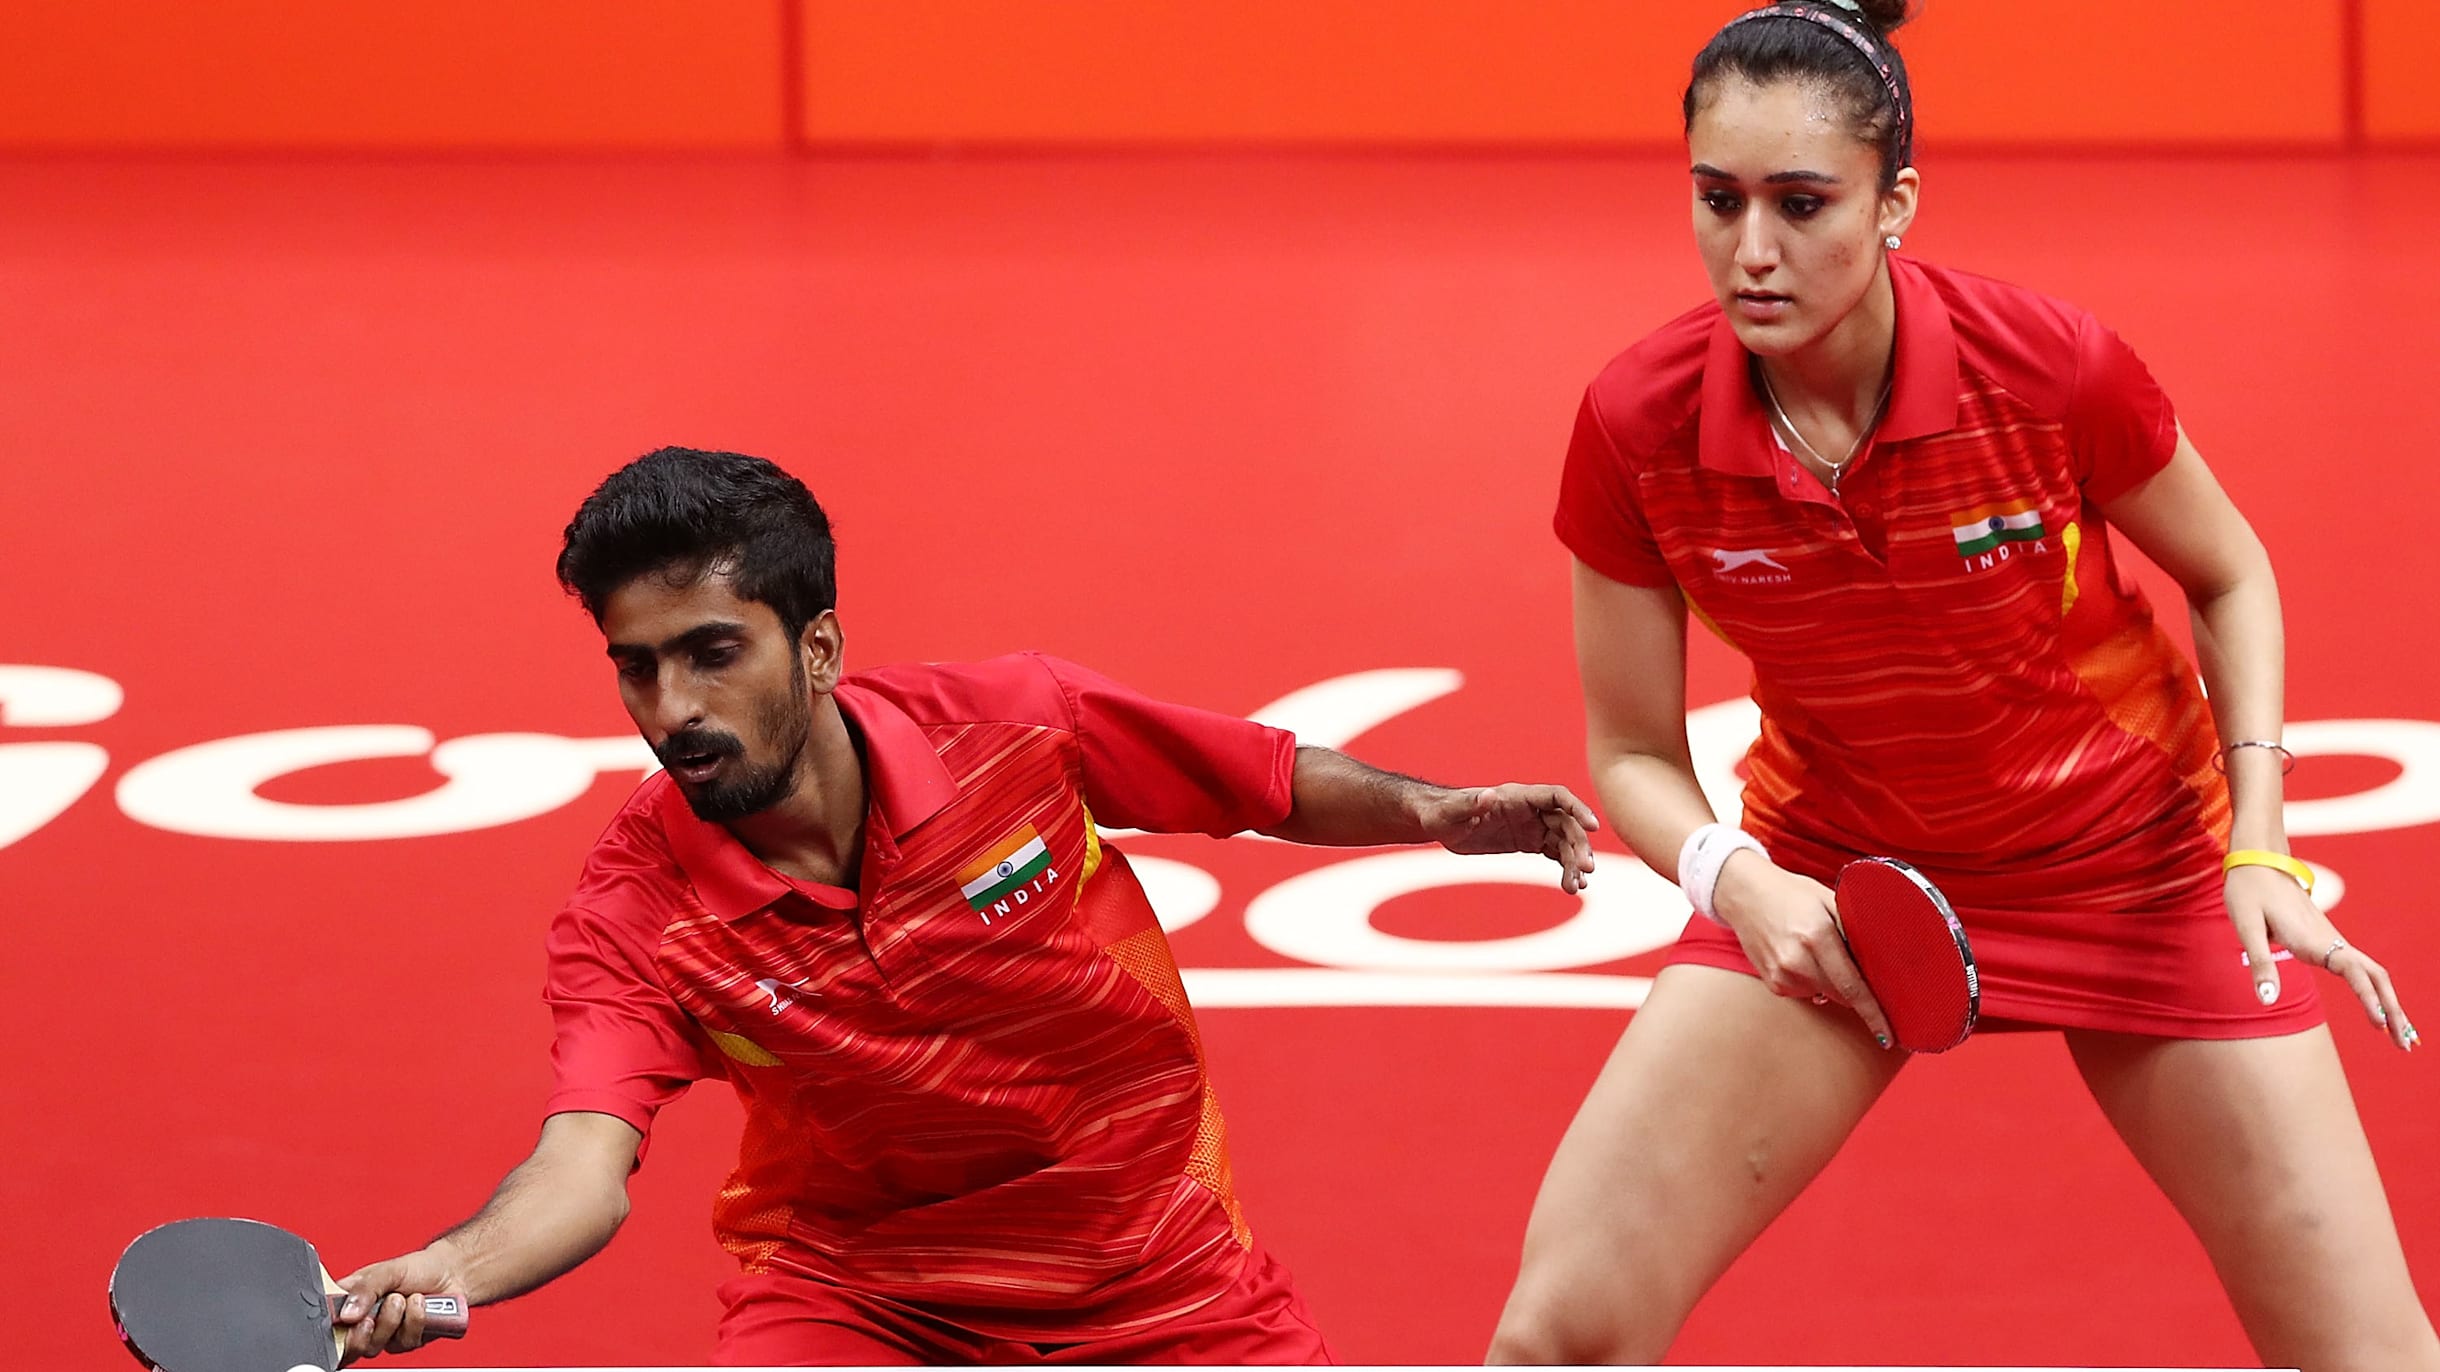 WTT Contender Lasko 2021 G Sathiyan, Manika Batra lead Indian table tennis squad, get schedule and watch live streaming